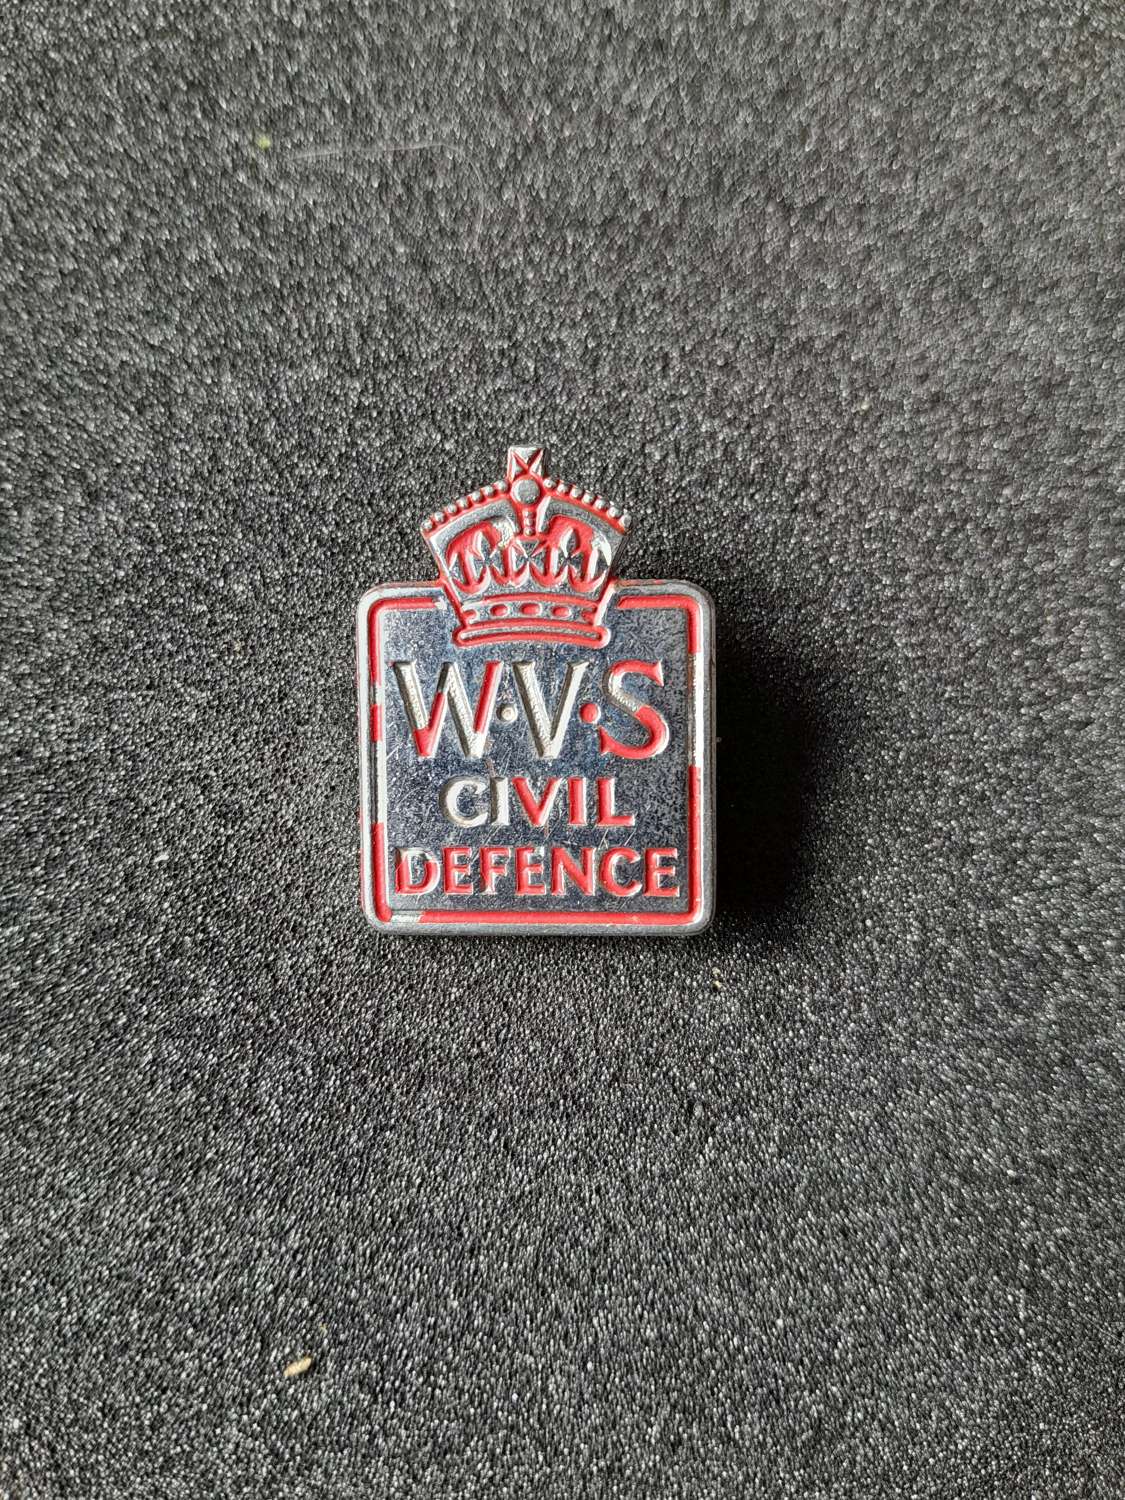 Woman's Voluntary Service Civil Defence Badge